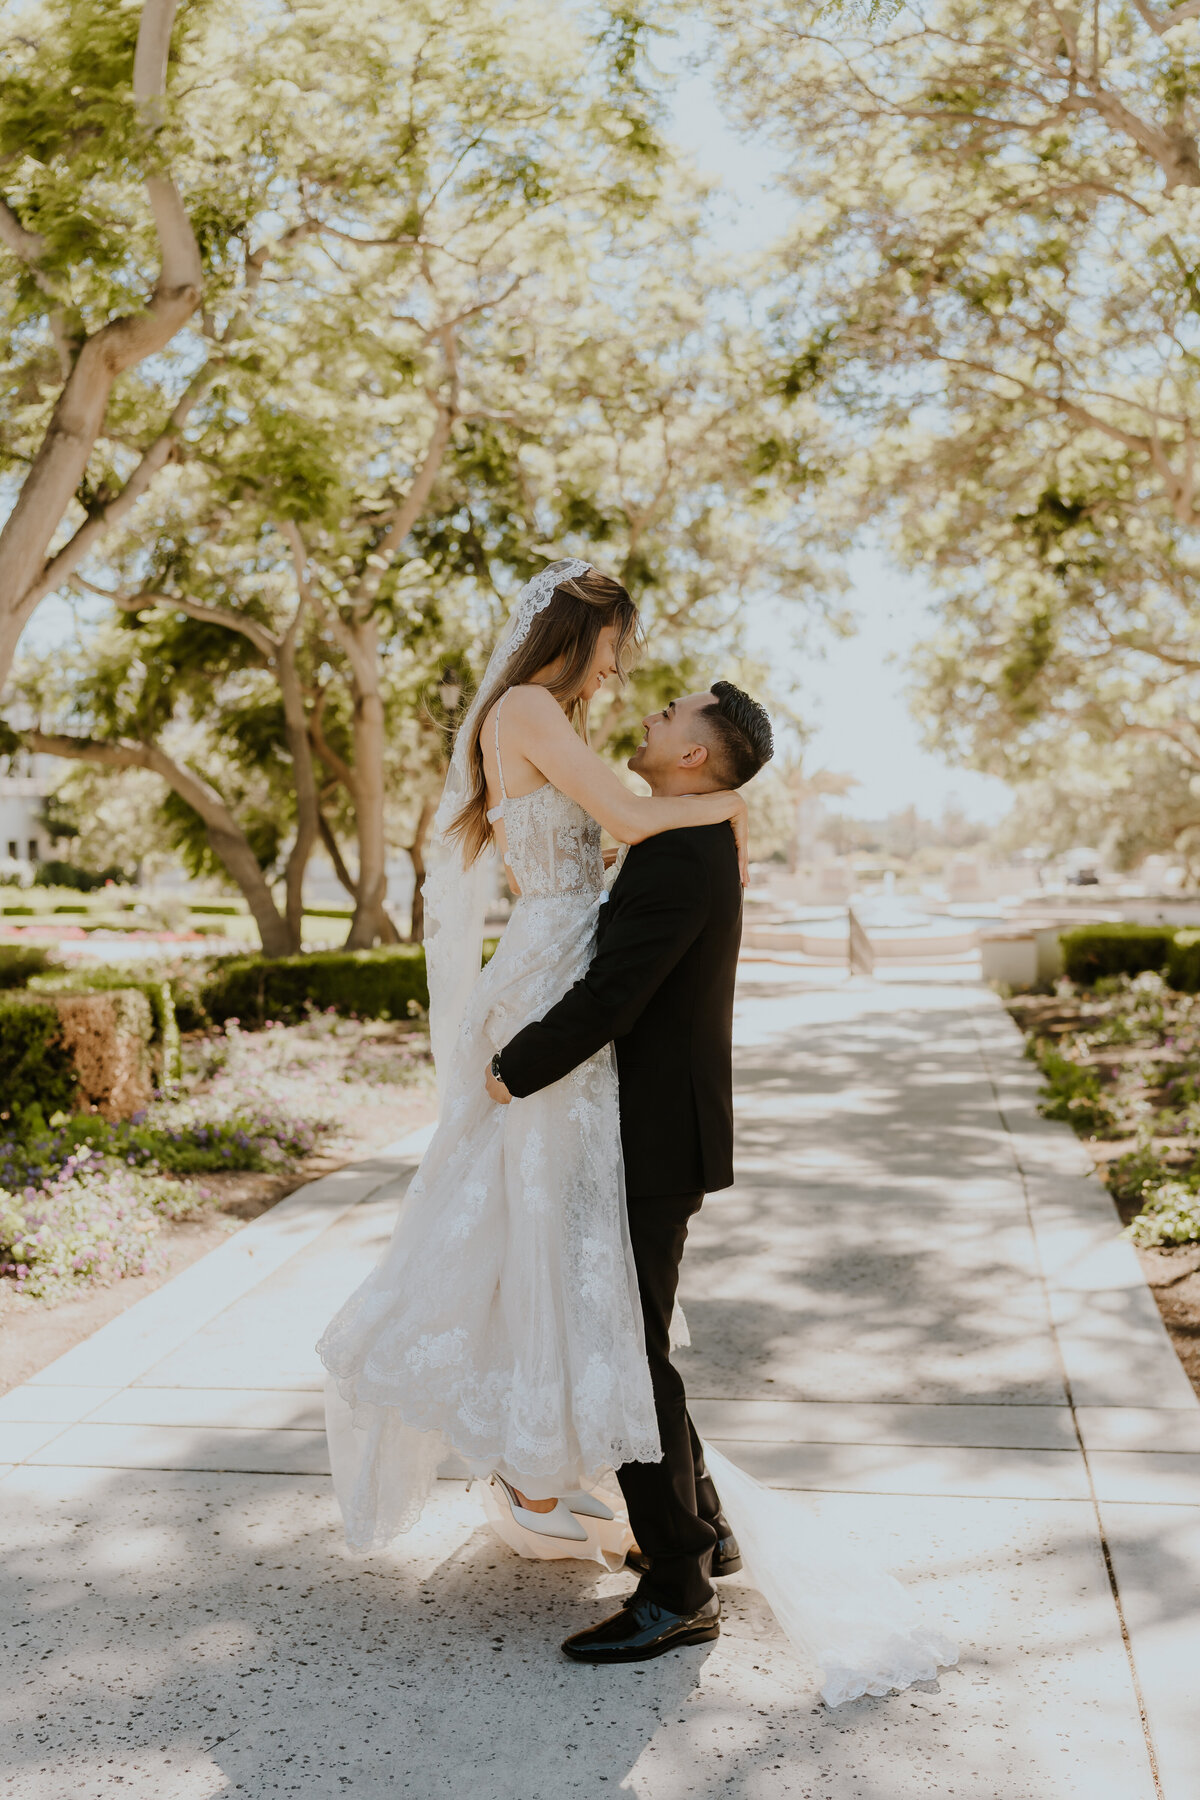 Temecula, California Wedding photographer Yescphotography Bride and Groom embracing each other